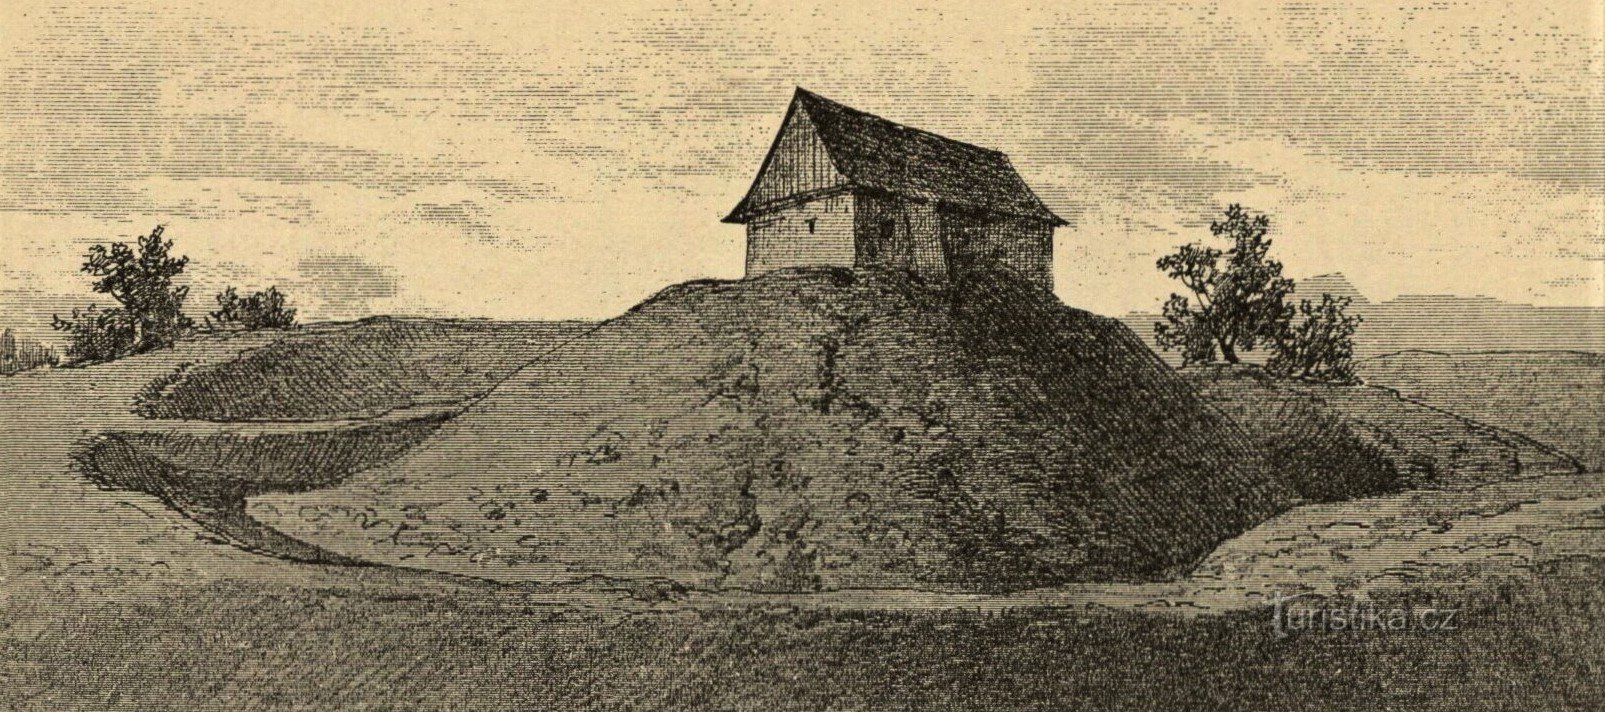 Appearance of Velkosvatoňovice fortress in the 19th century